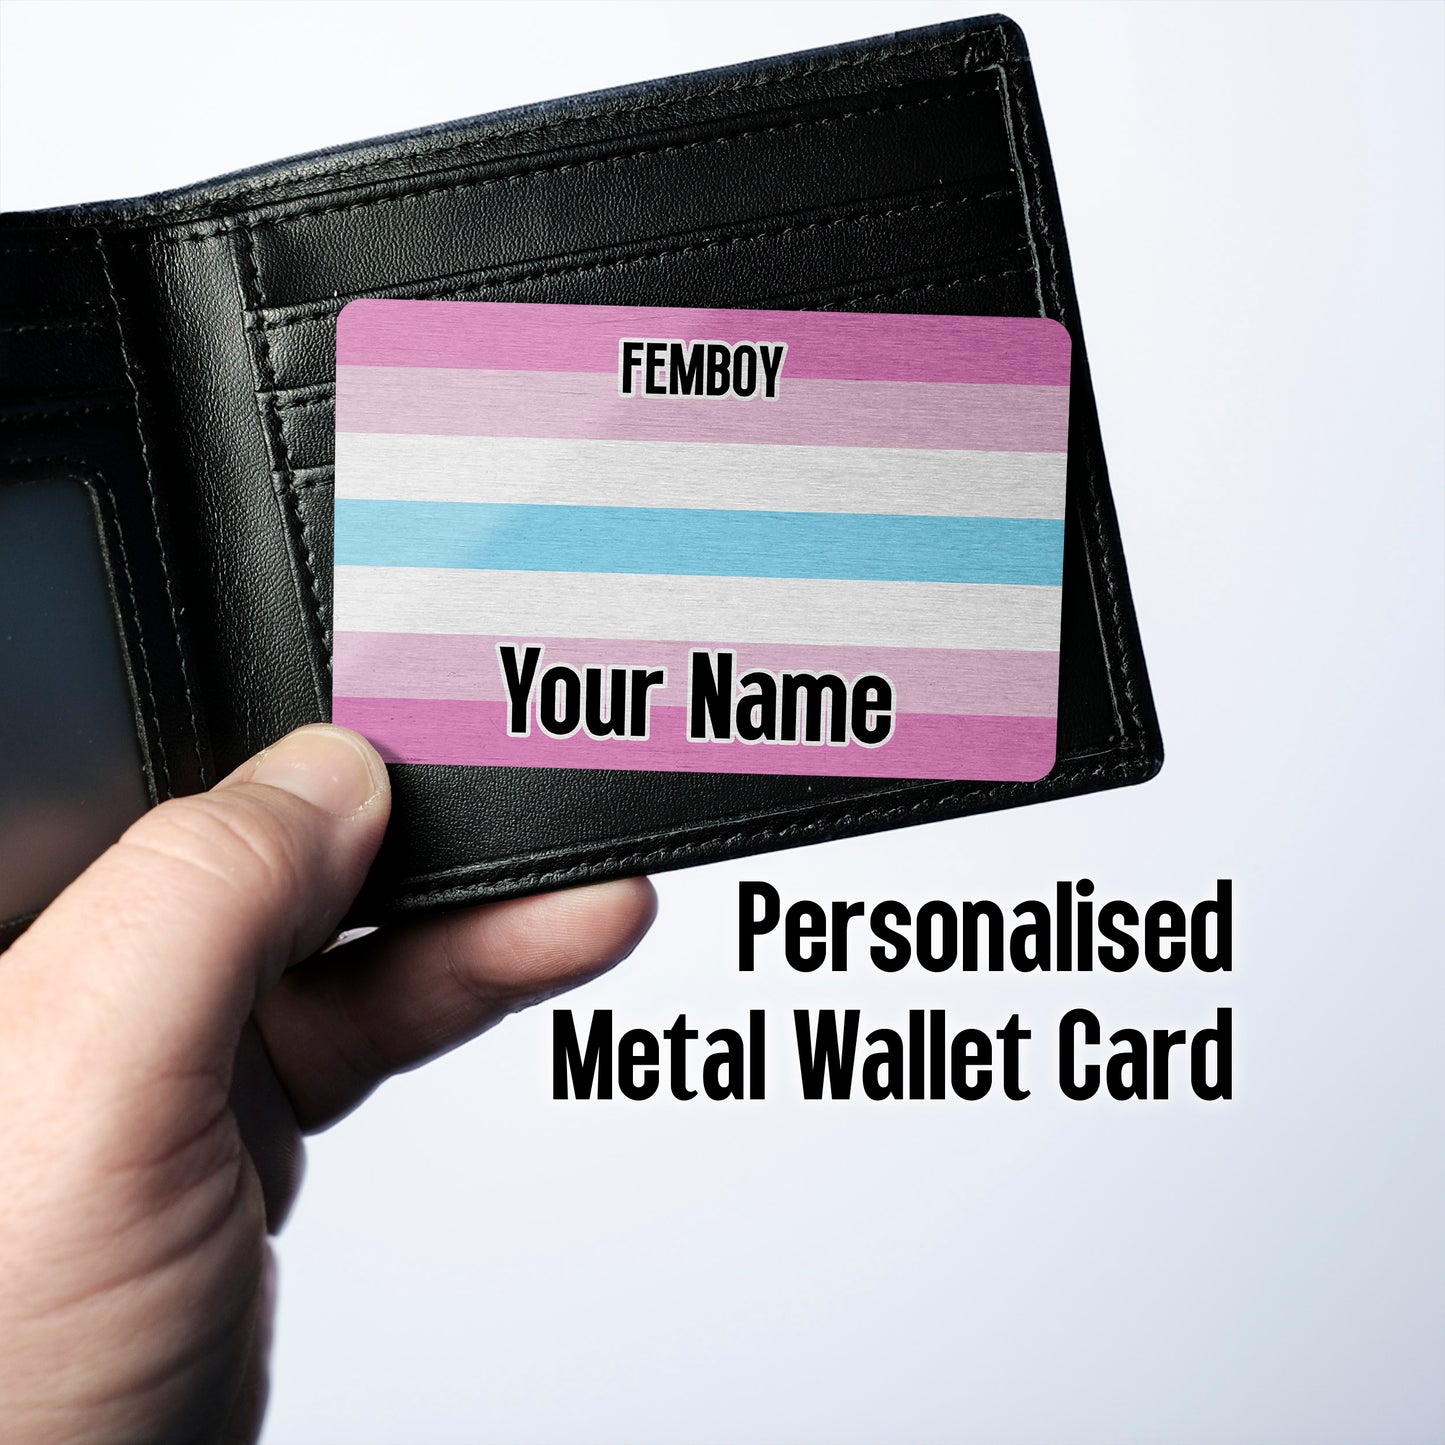 Aluminium wallet card personalised with your name and the femboy pride flag